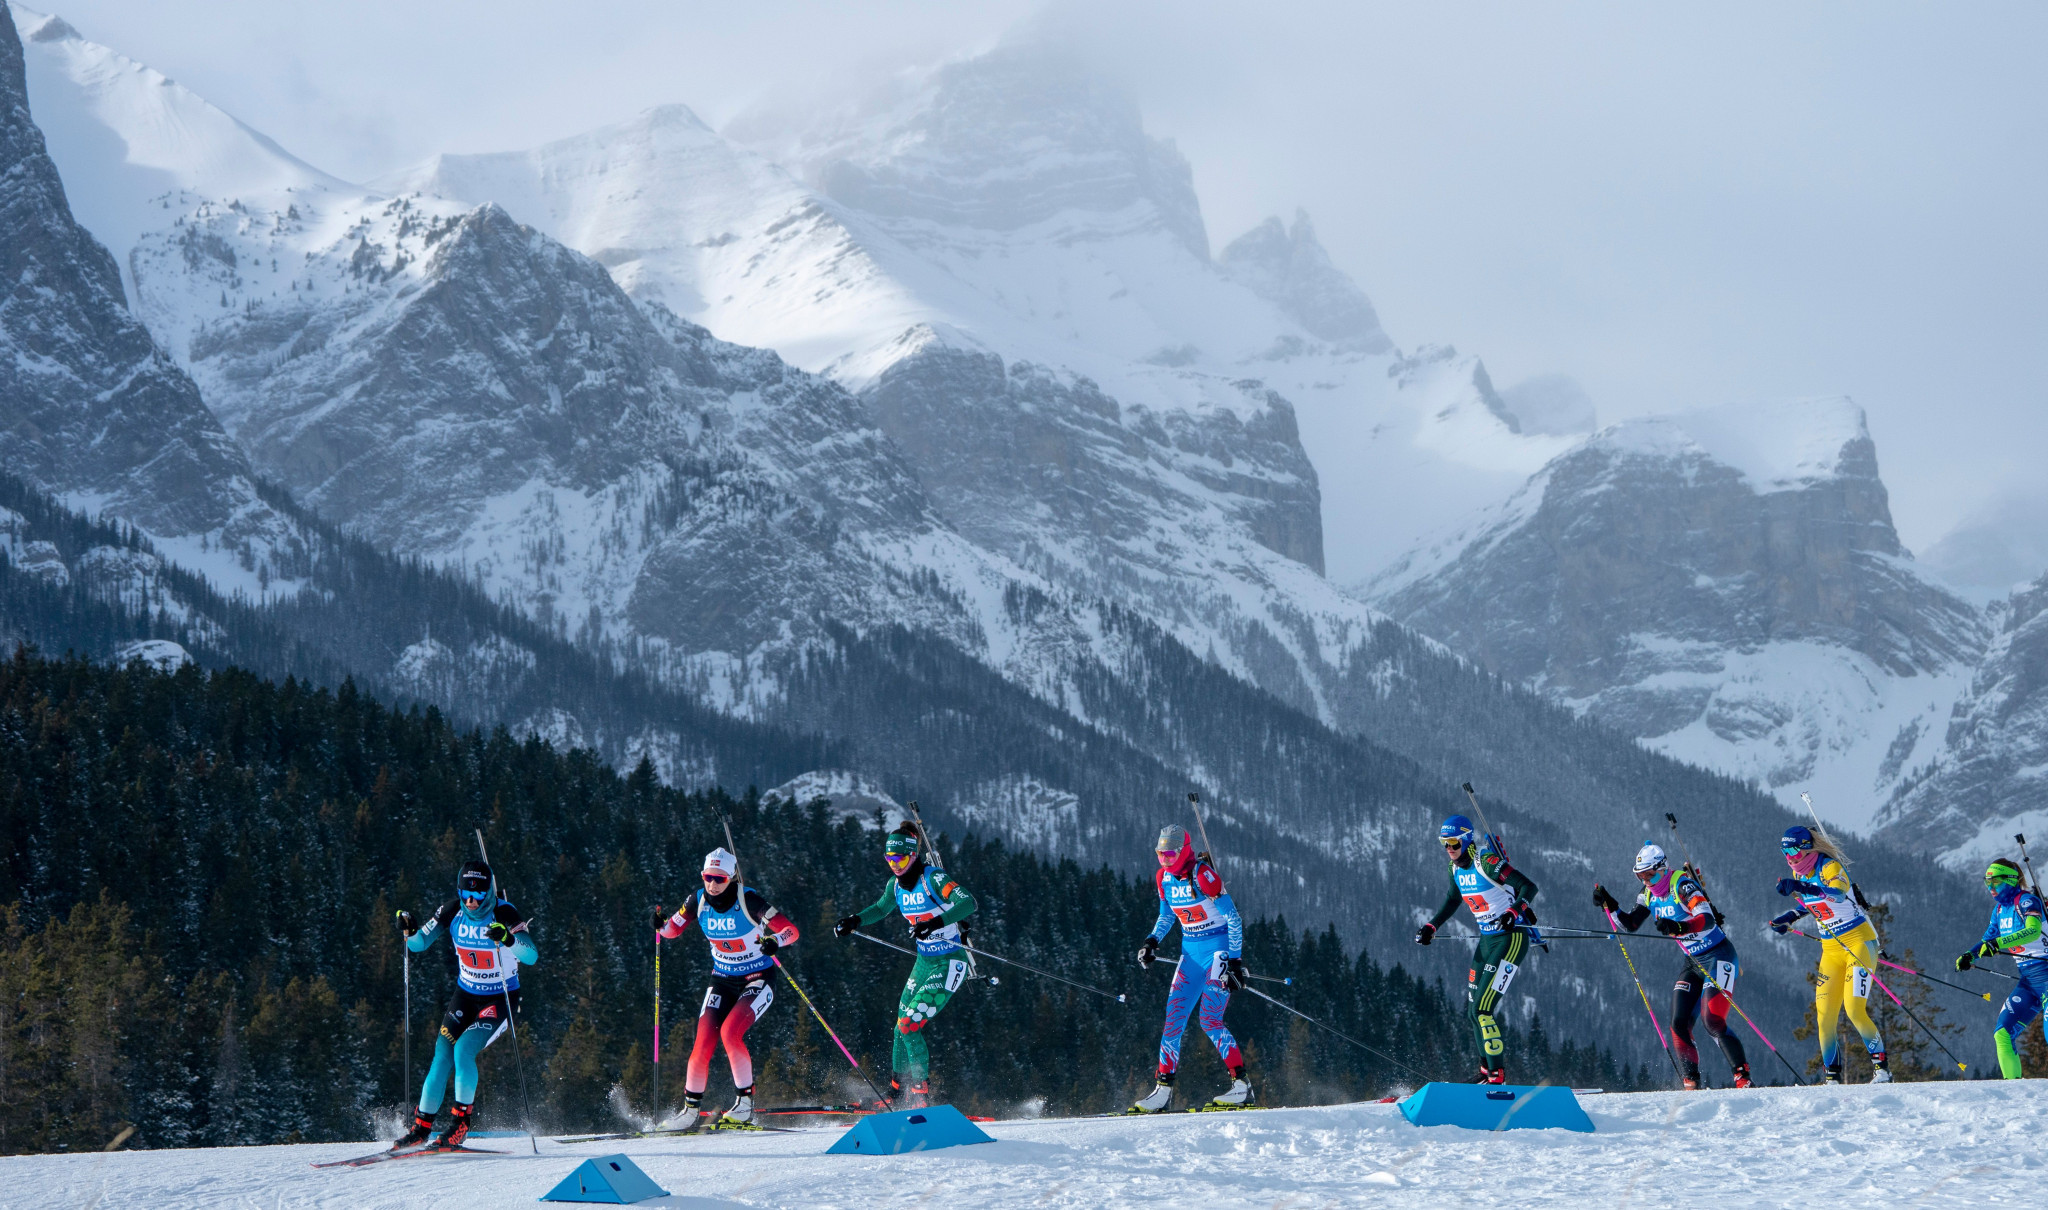 Canmore has held several winter sport events including the Biathlon World Cup ©Getty Images